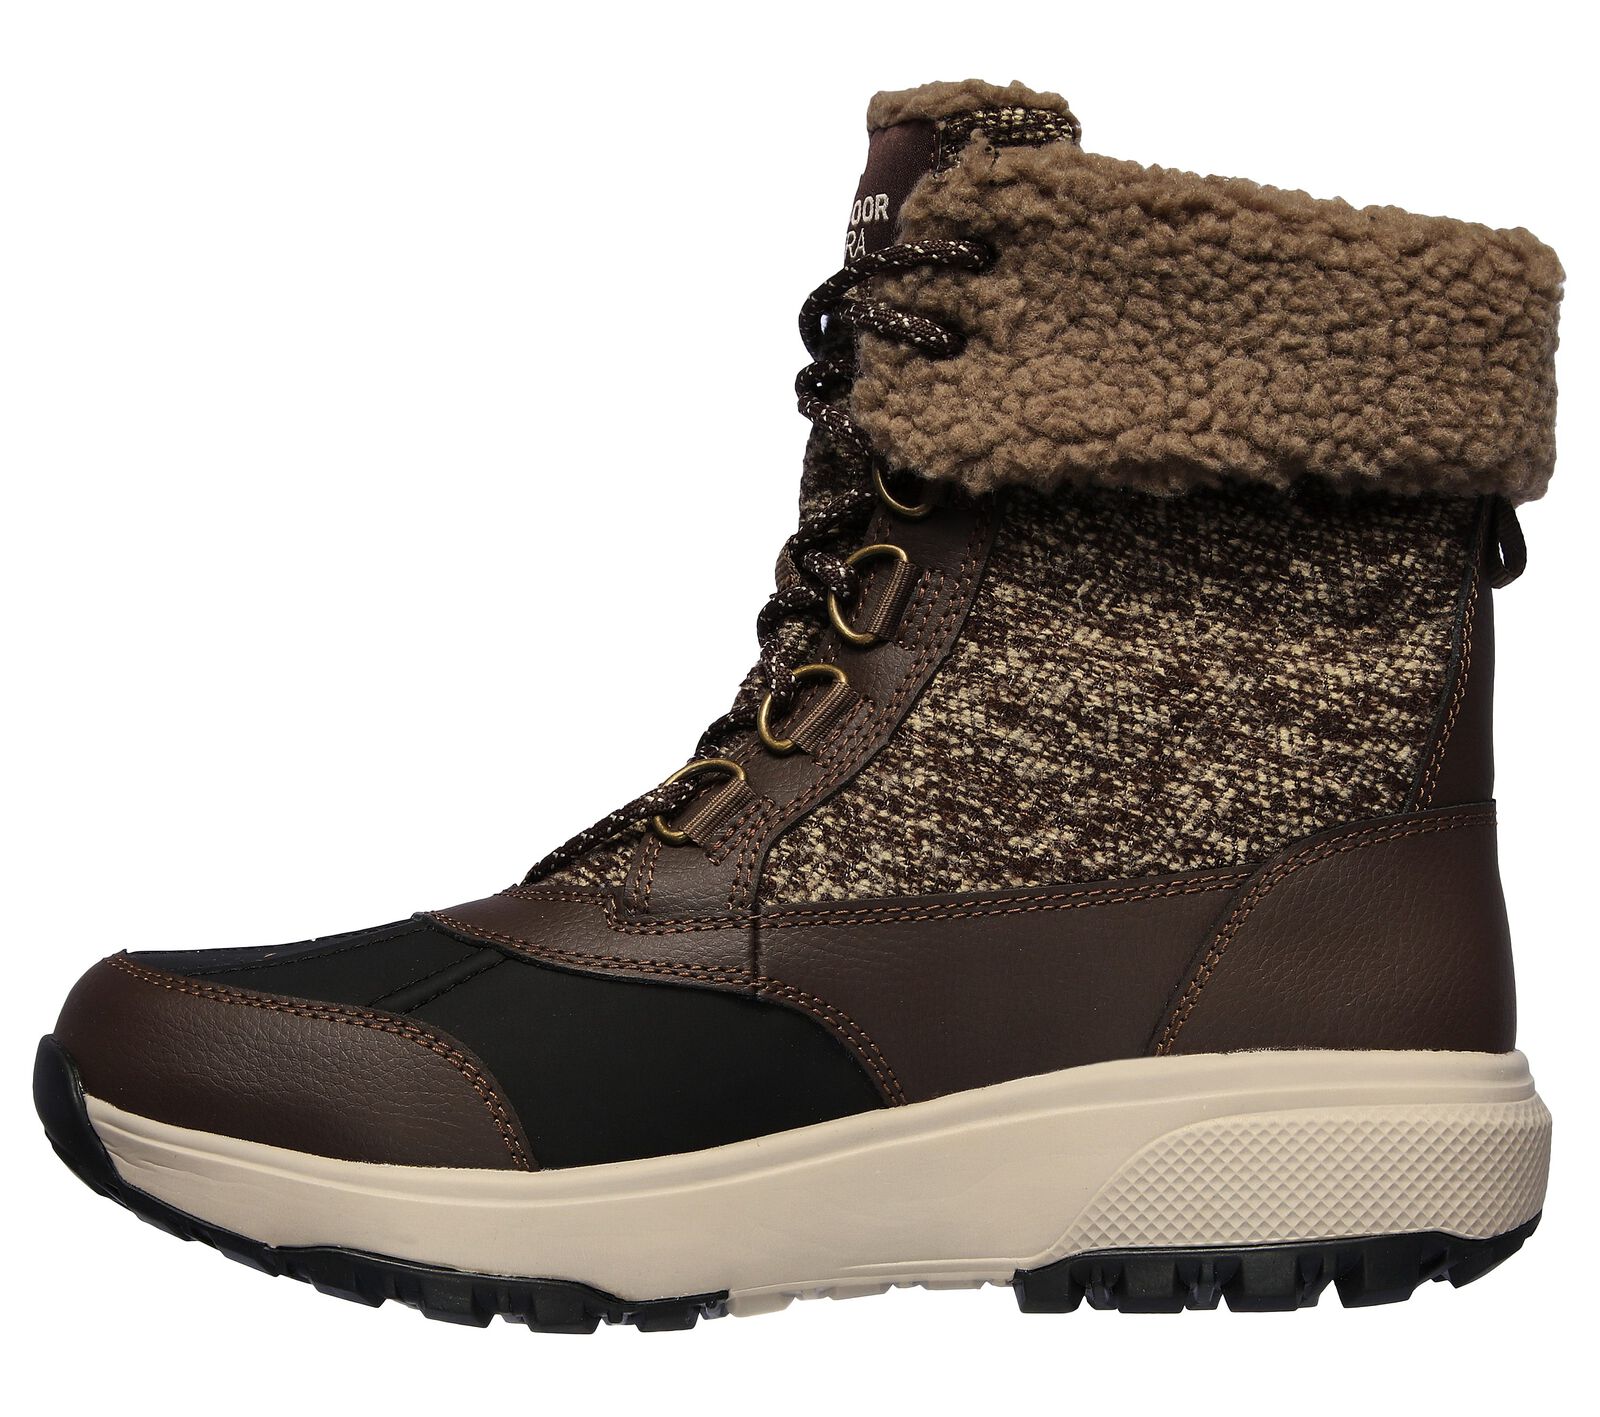 Shop the Skechers On the GO Outdoor Ultra - Hillcrest | SKECHERS